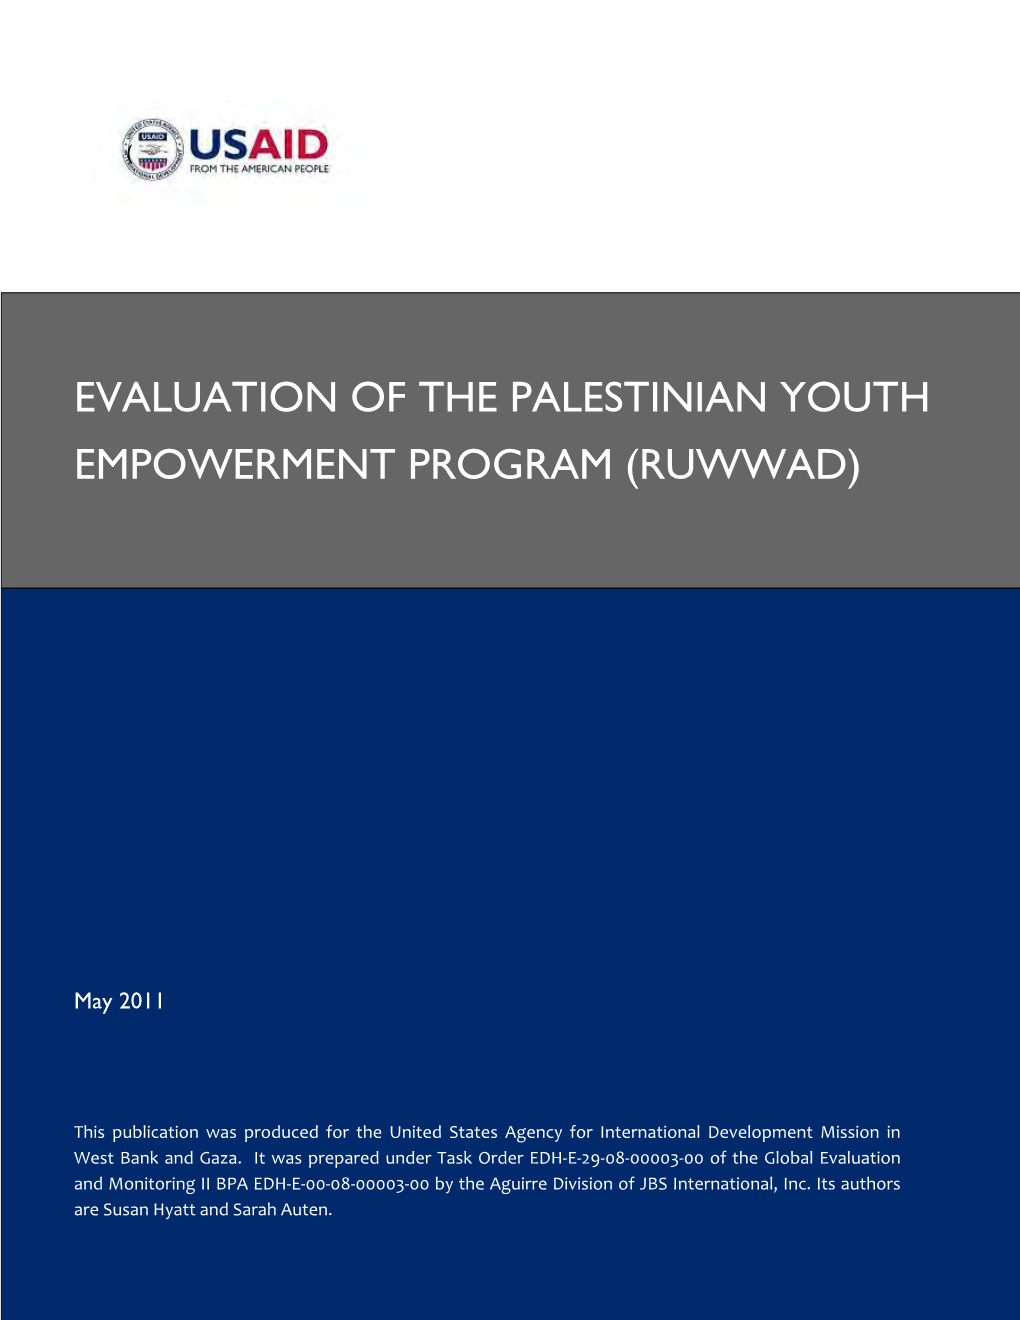 Evaluation of the Palestinian Youth Empowerment Program (Ruwwad)